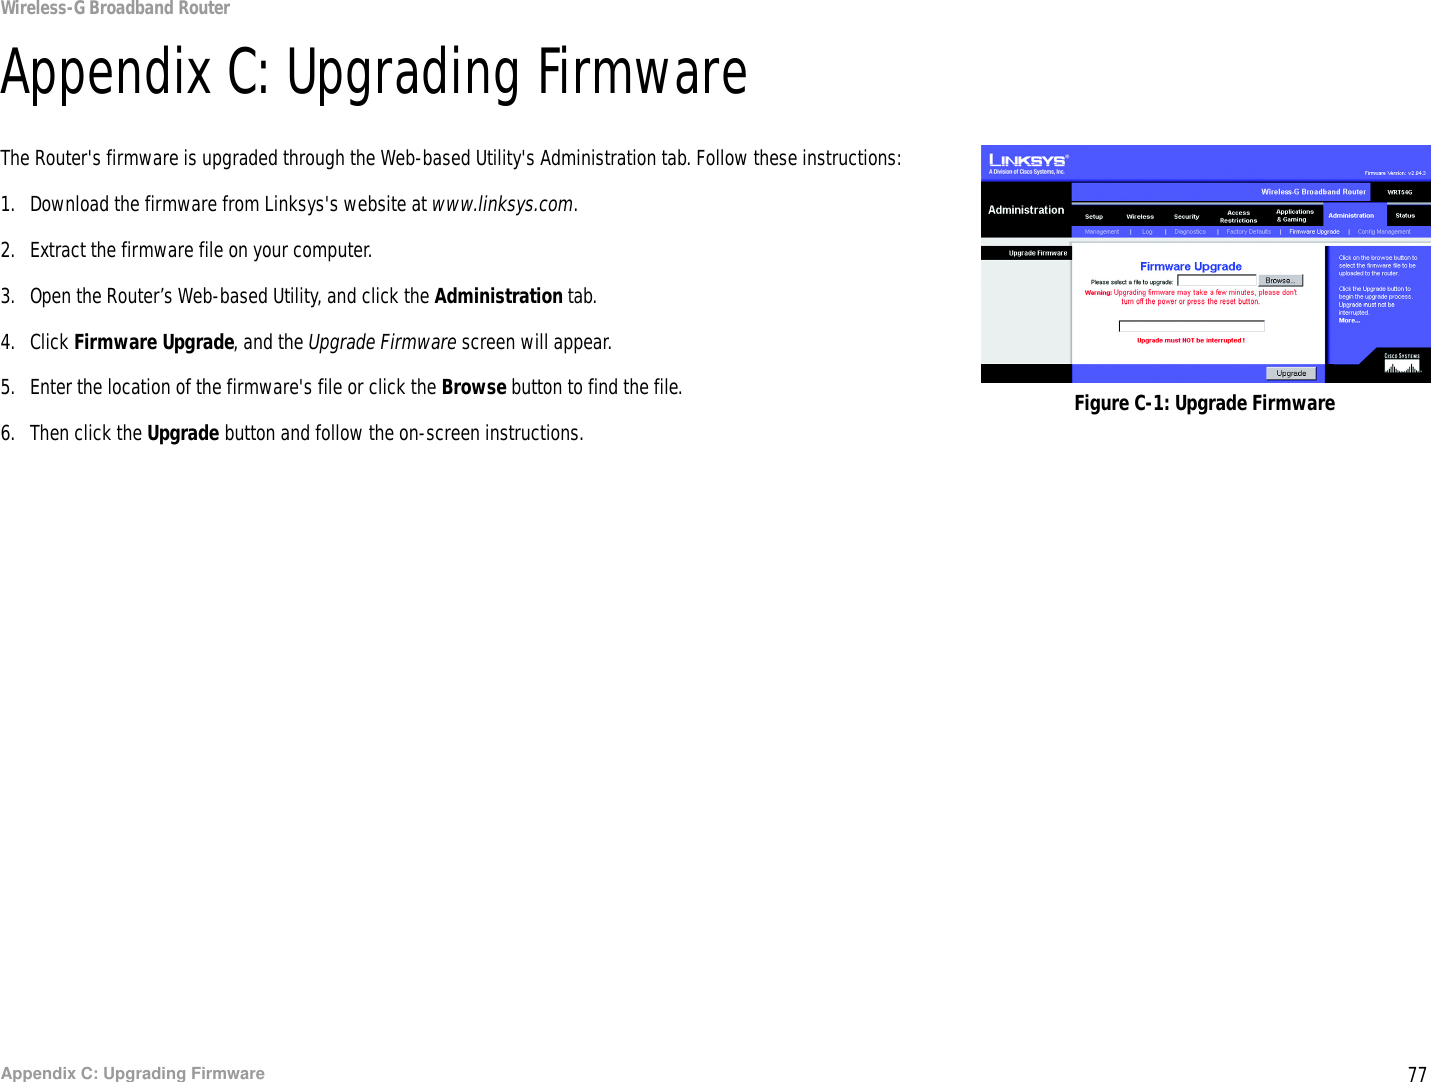 77Appendix C: Upgrading FirmwareWireless-G Broadband RouterAppendix C: Upgrading FirmwareThe Router&apos;s firmware is upgraded through the Web-based Utility&apos;s Administration tab. Follow these instructions:1. Download the firmware from Linksys&apos;s website at www.linksys.com.2. Extract the firmware file on your computer.3. Open the Router’s Web-based Utility, and click the Administration tab.4. Click Firmware Upgrade, and the Upgrade Firmware screen will appear.5. Enter the location of the firmware&apos;s file or click the Browse button to find the file.6. Then click the Upgrade button and follow the on-screen instructions. Figure C-1: Upgrade Firmware